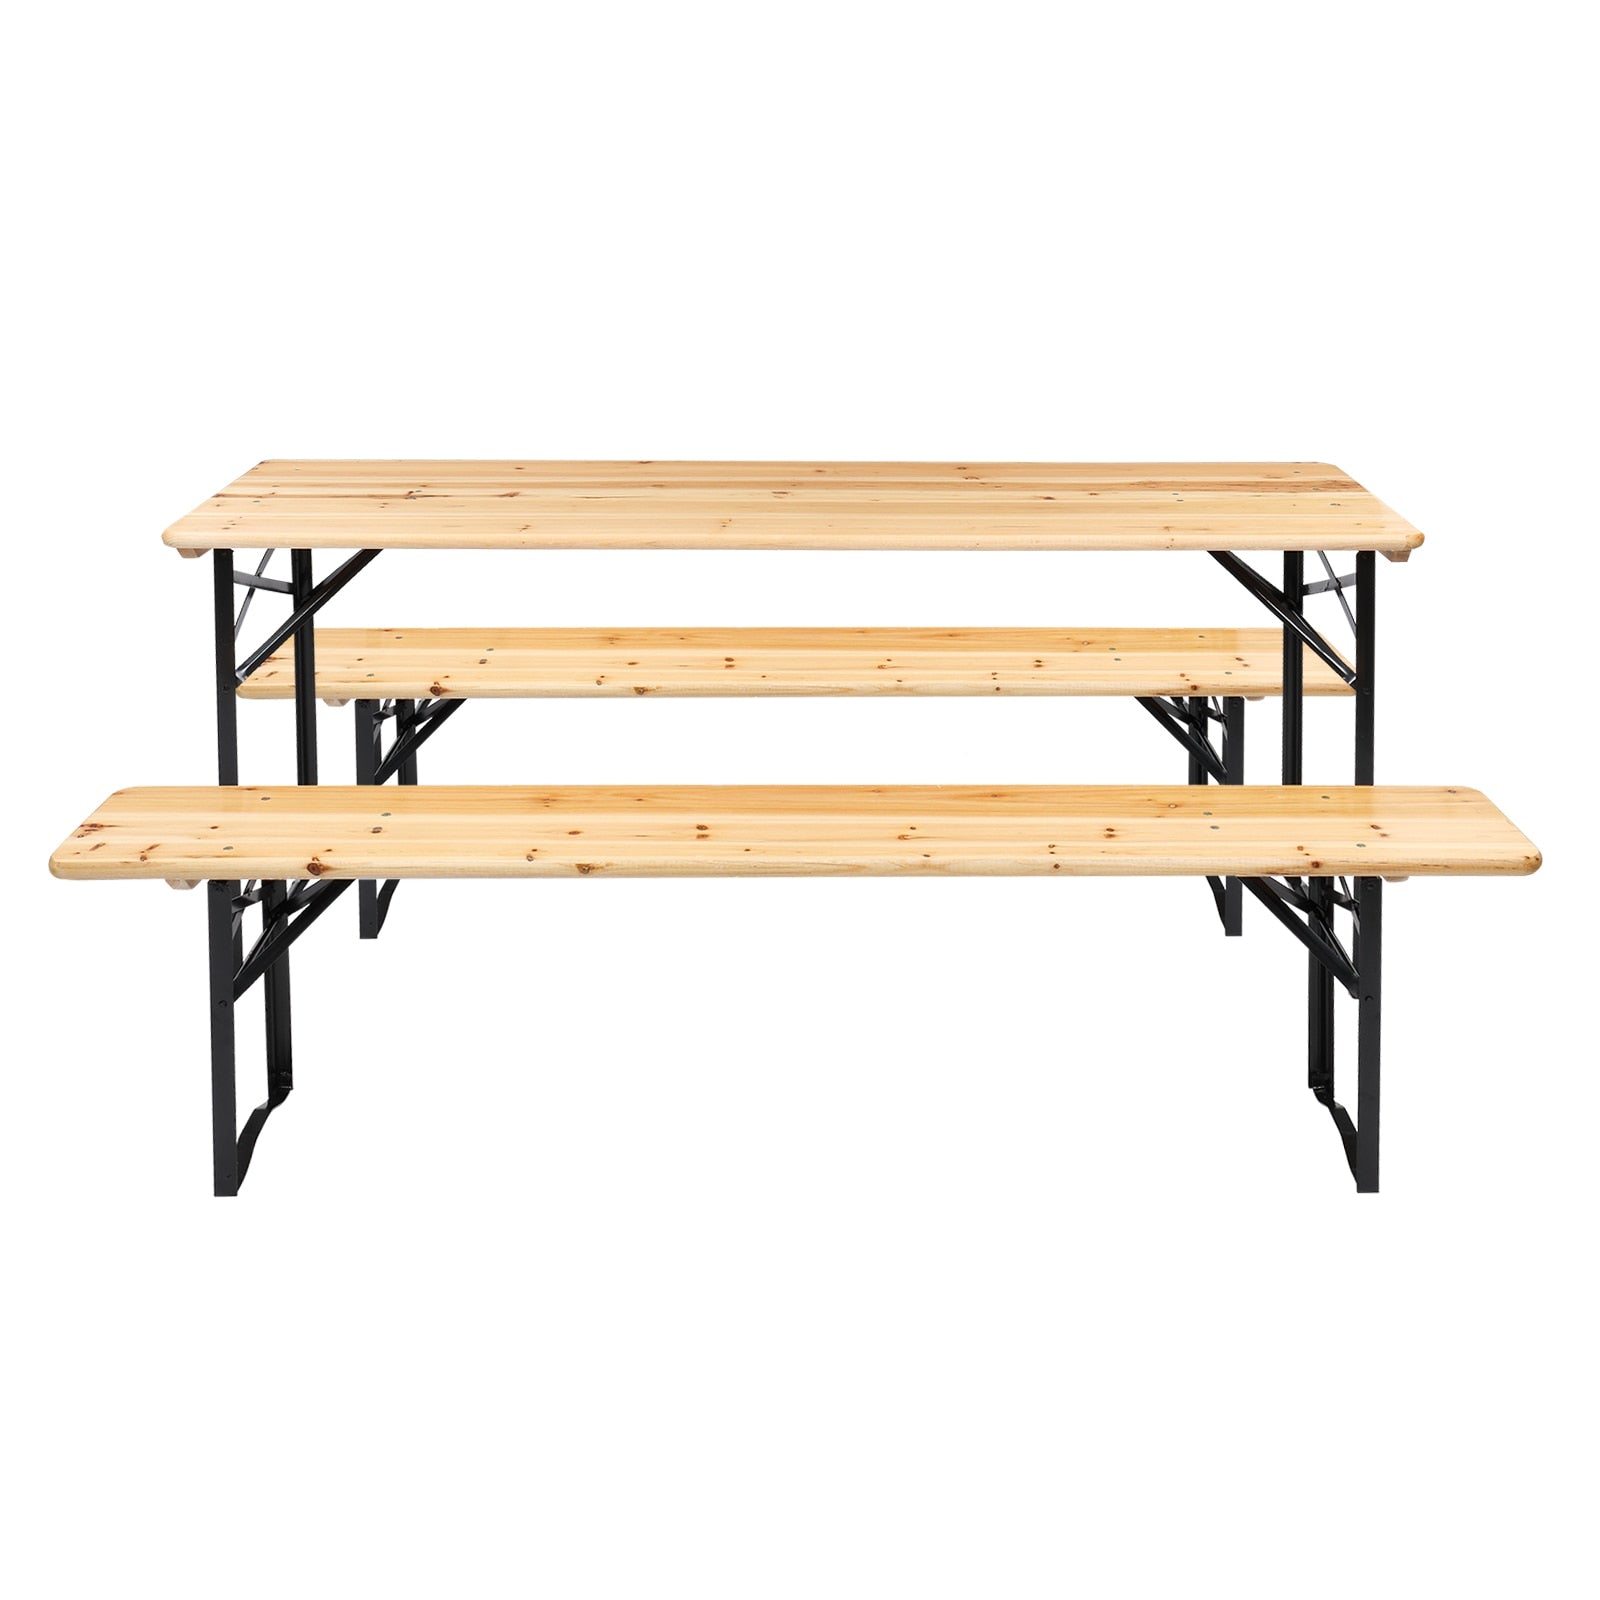 Full picture of folding picnic table with bench